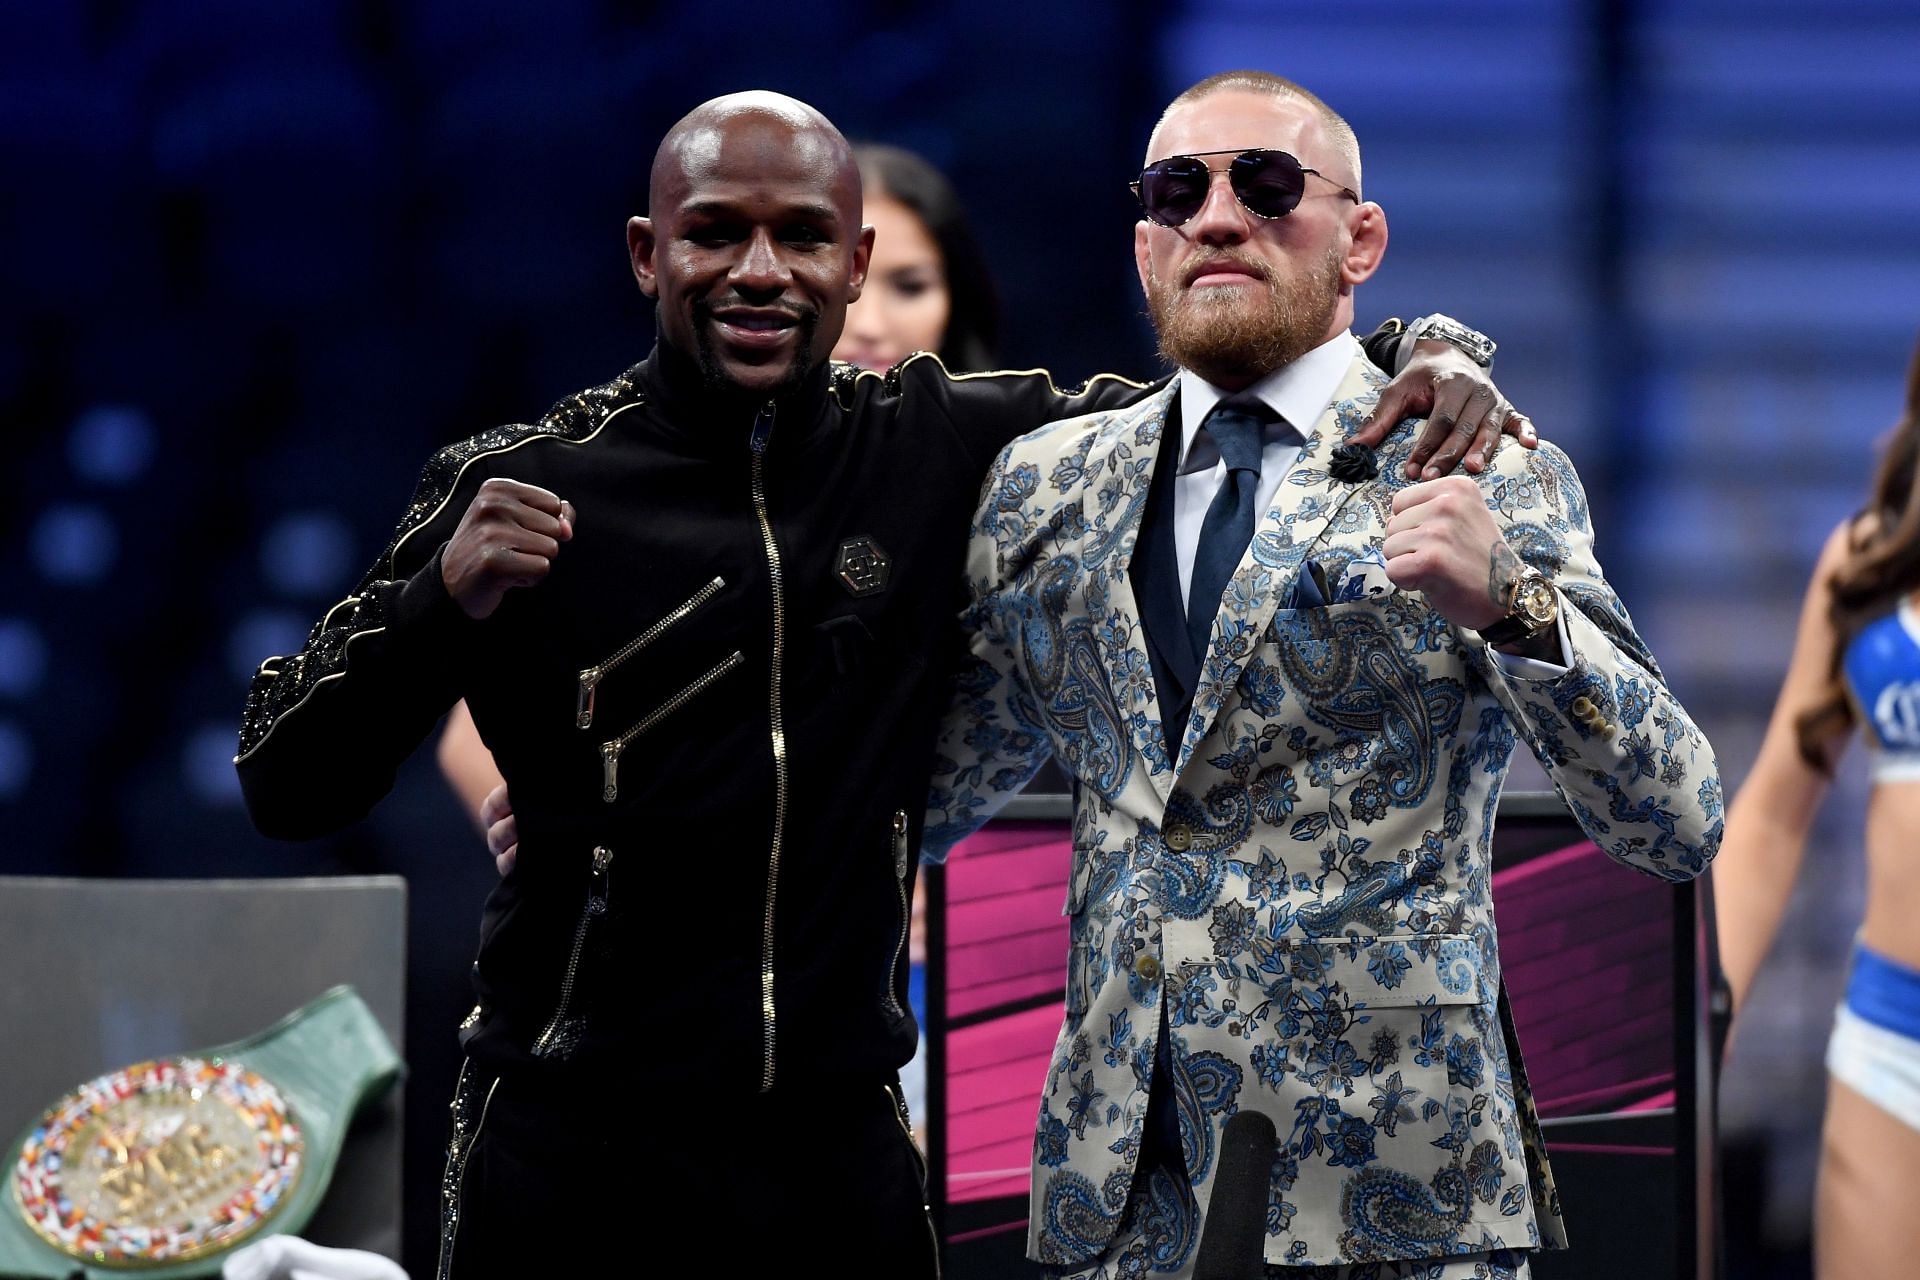 Floyd Mayweather Jr. (left) and Conor McGregor (right)